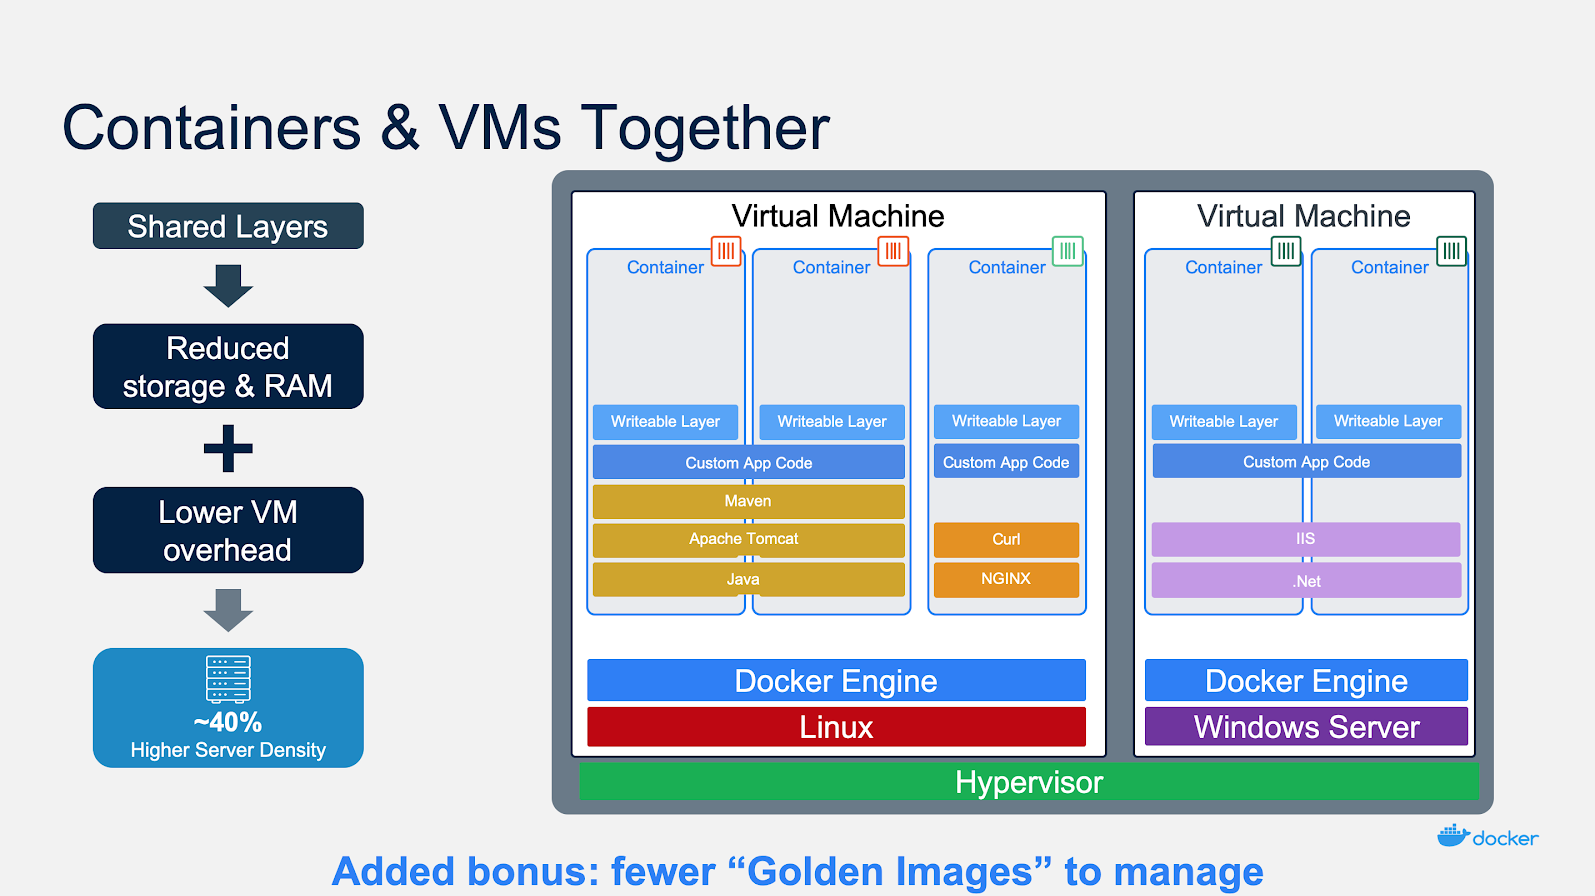 Containers and vms